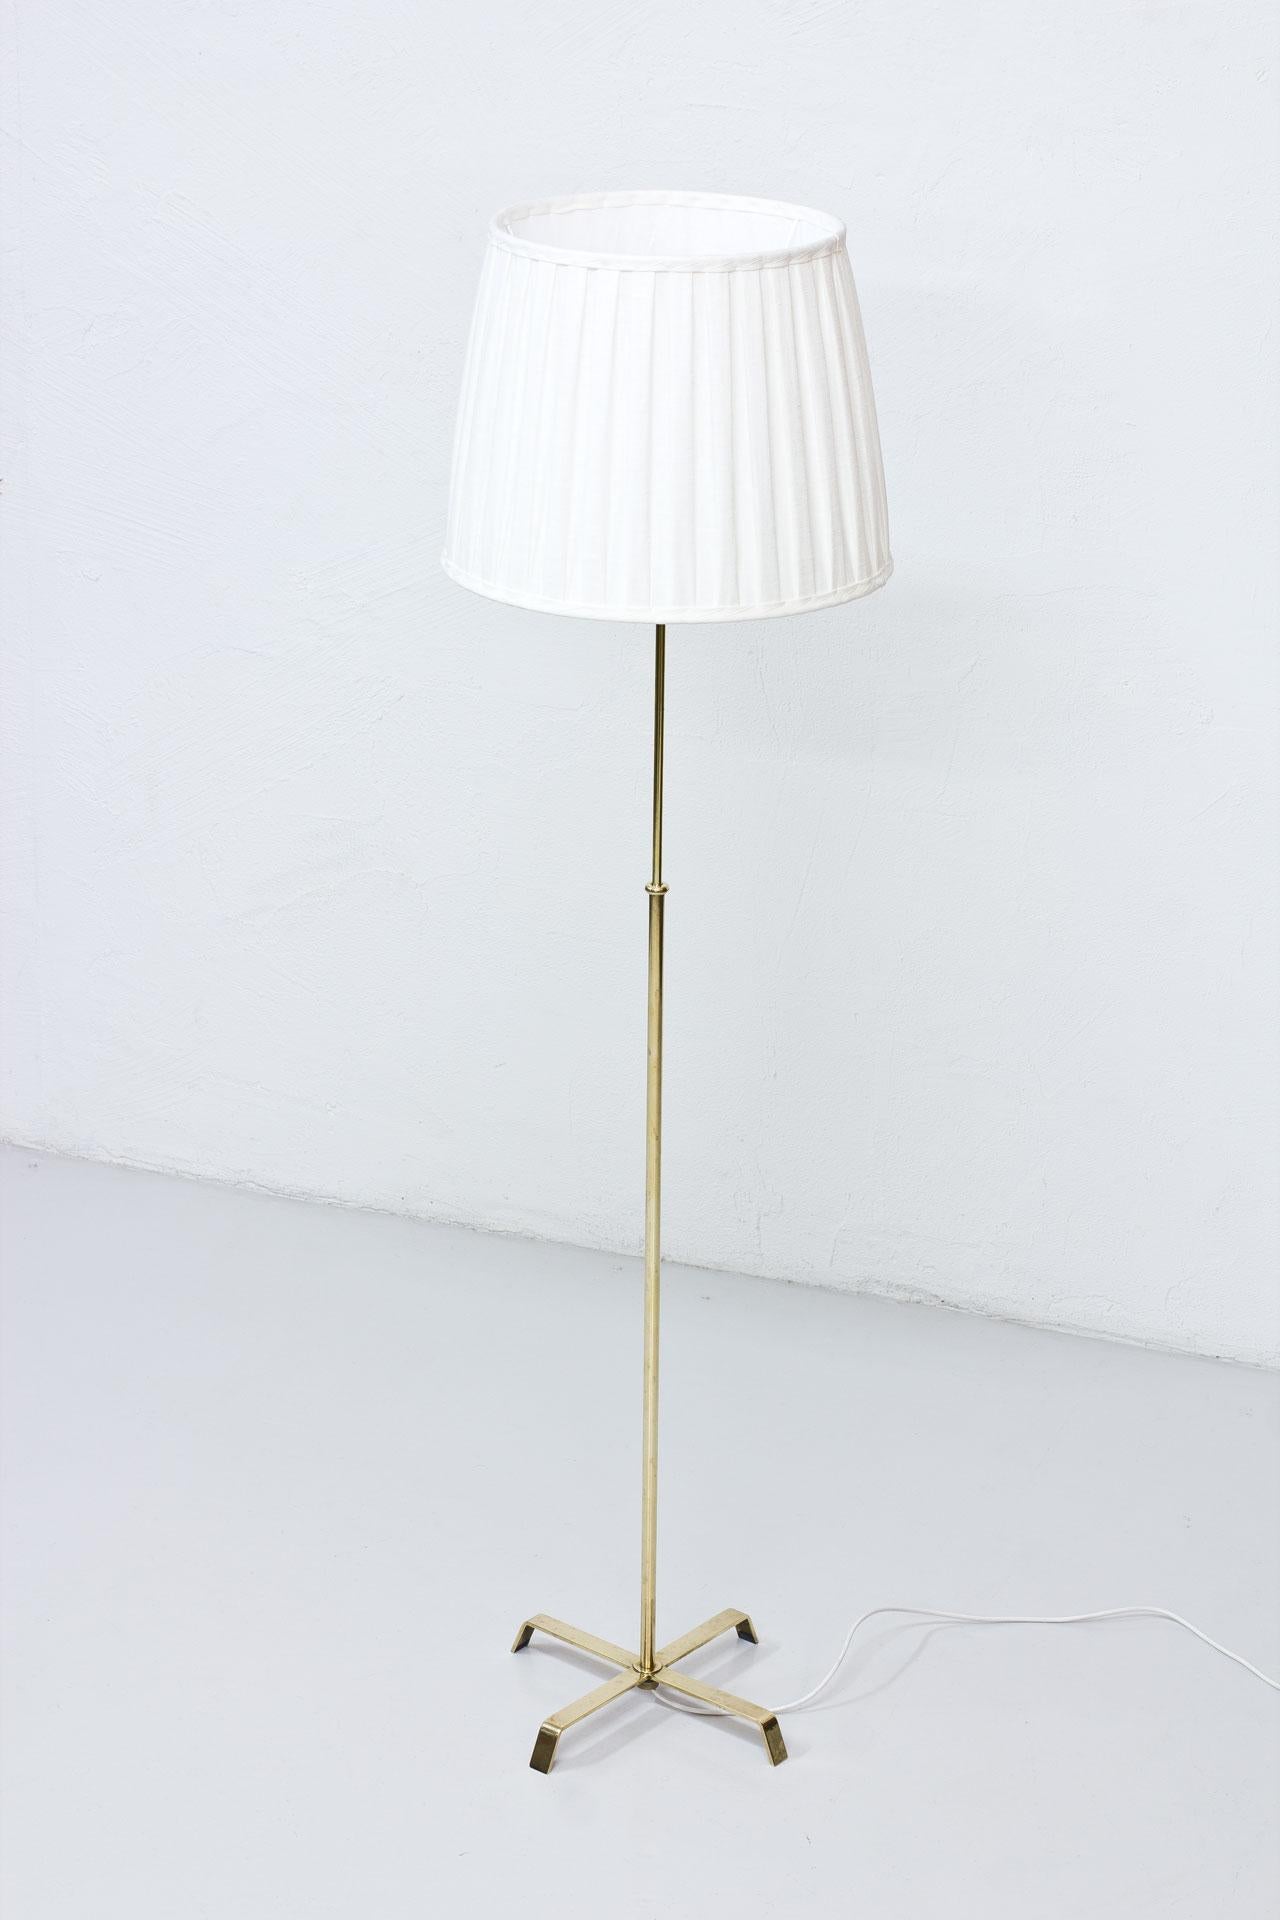 Floor lamp manufactured in Sweden by Böhlmarks lampfabrik during the 1940s.  Made from solid brass with hand pleated lamp shade in linen fabric.
Adjustable height of the stem. Engraved on the base.